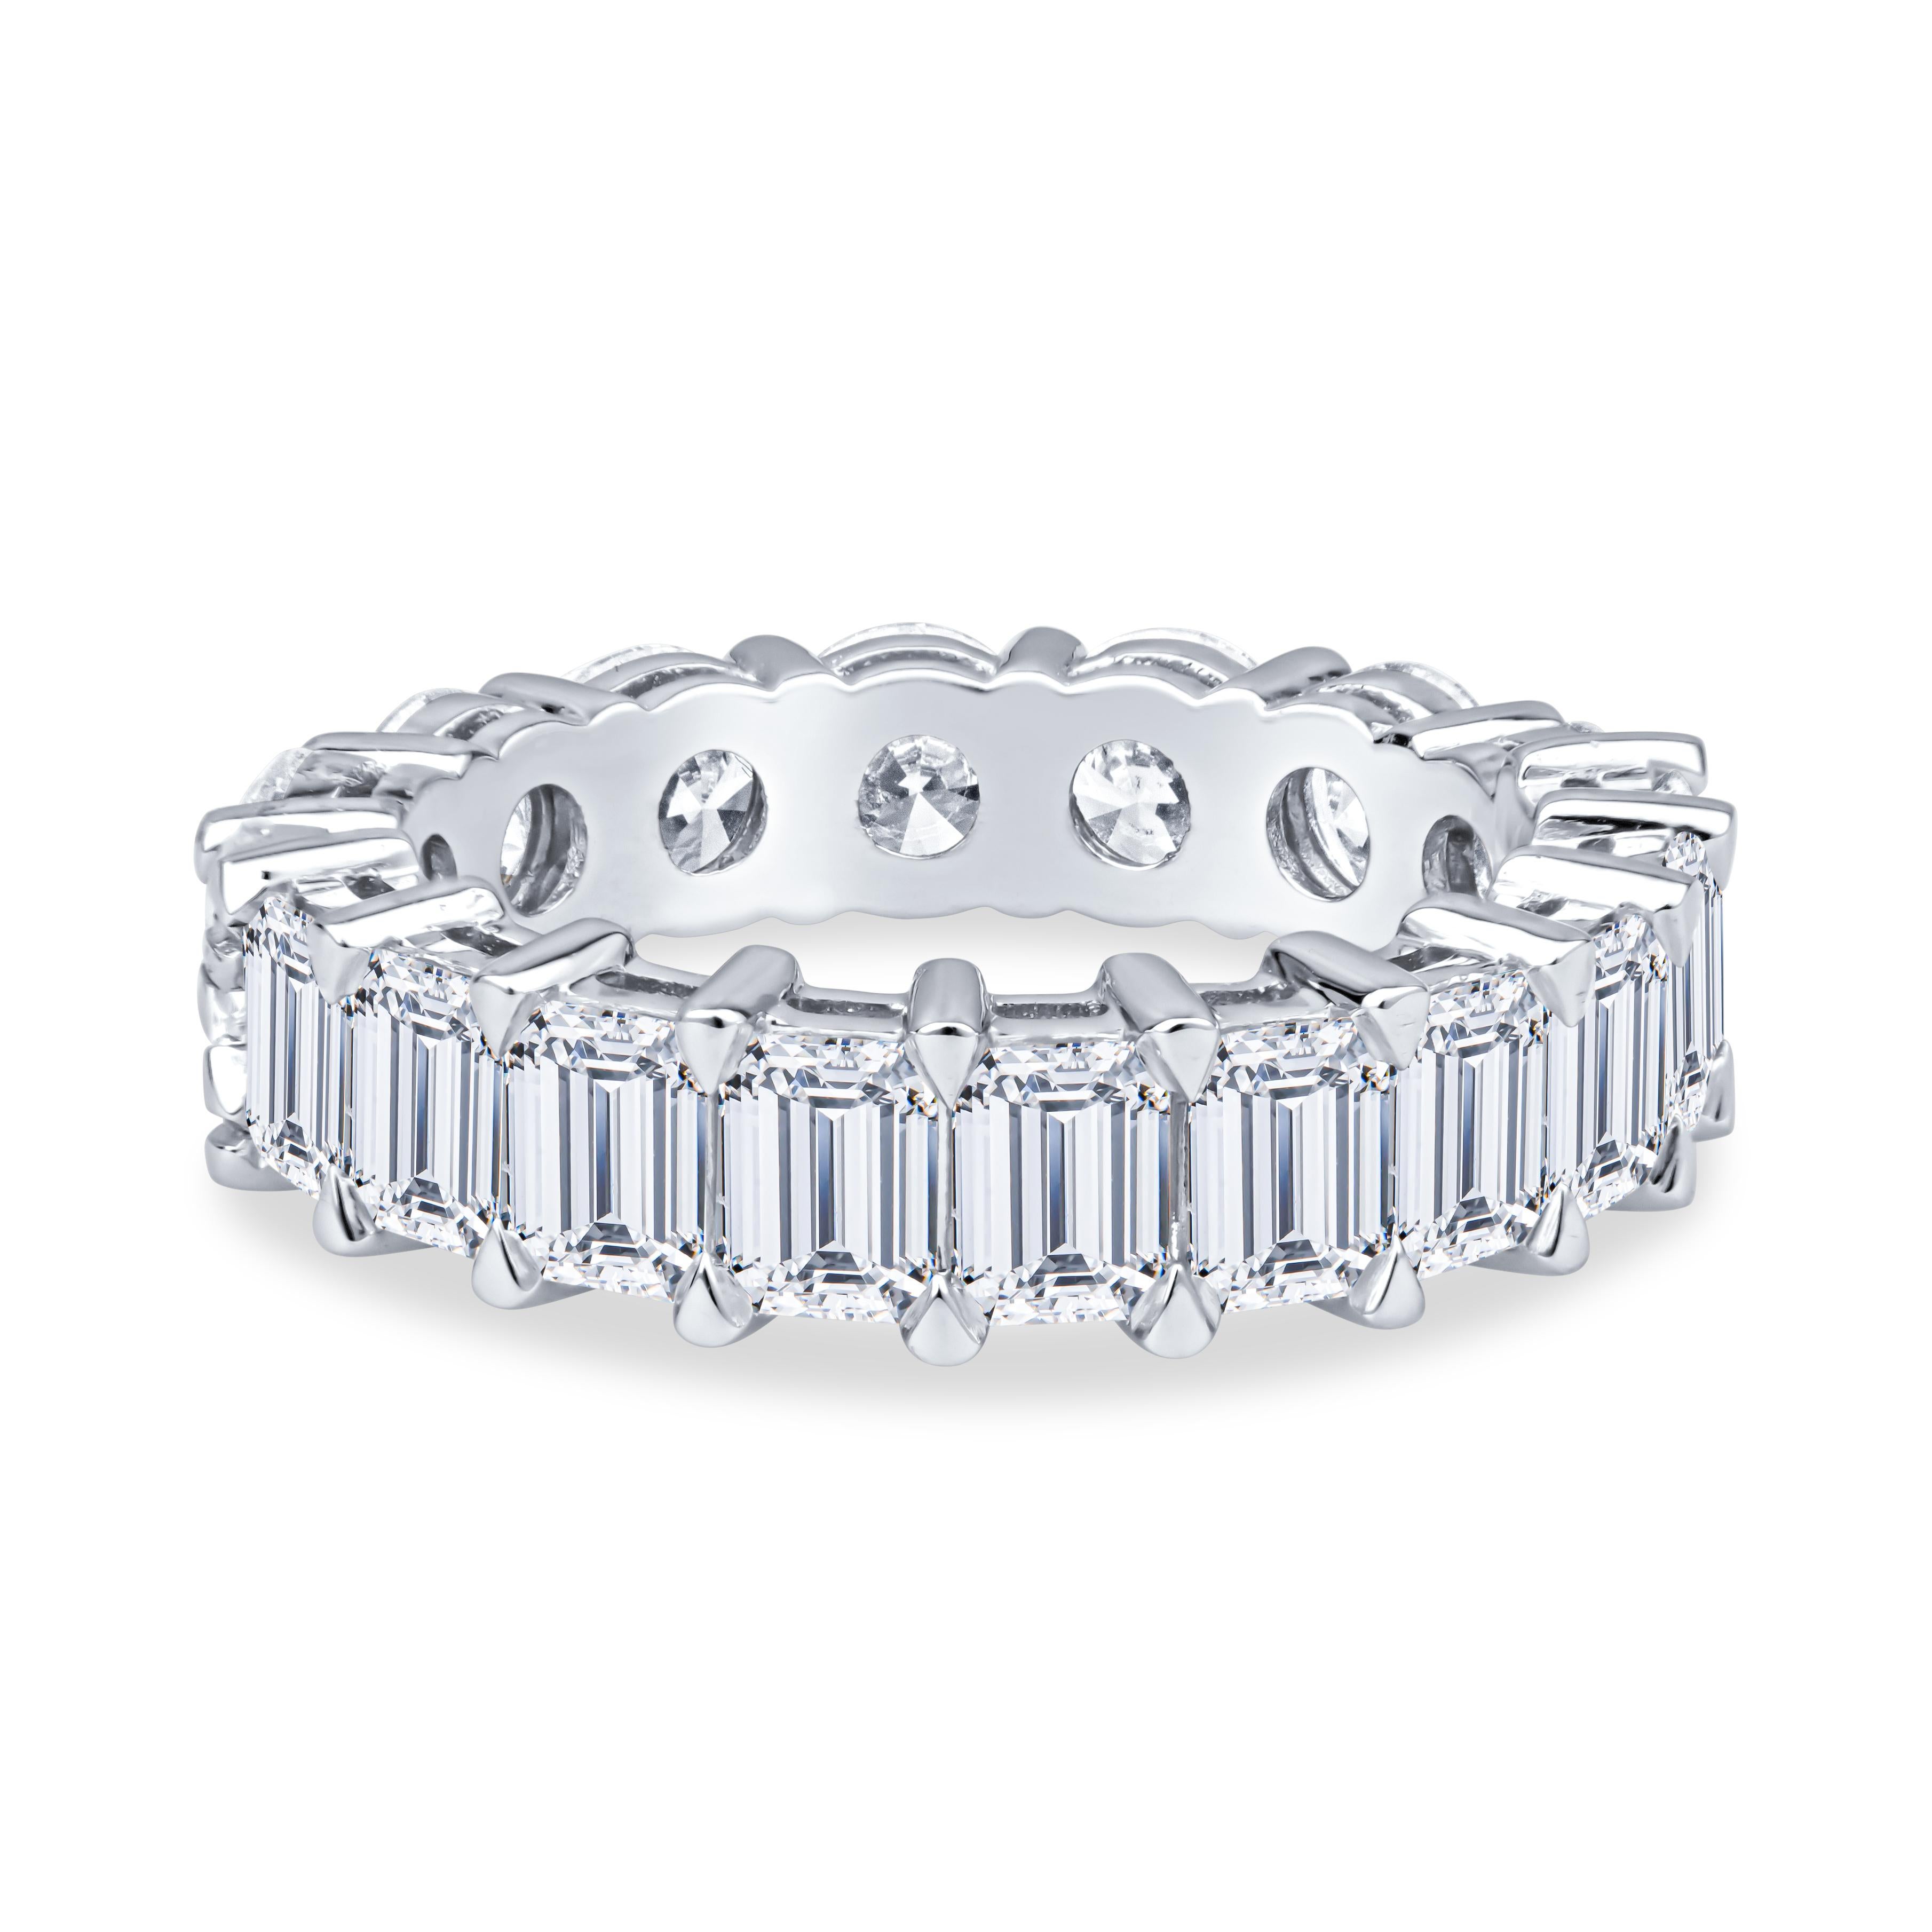 This incredibly unique eternity bands offers the best of both worlds. One side is comprised of 9 emerald cut diamonds and the other side is comprised of 9 round diamonds, adding up to 4.48ctw in diamonds. It can be worn on either side or in the